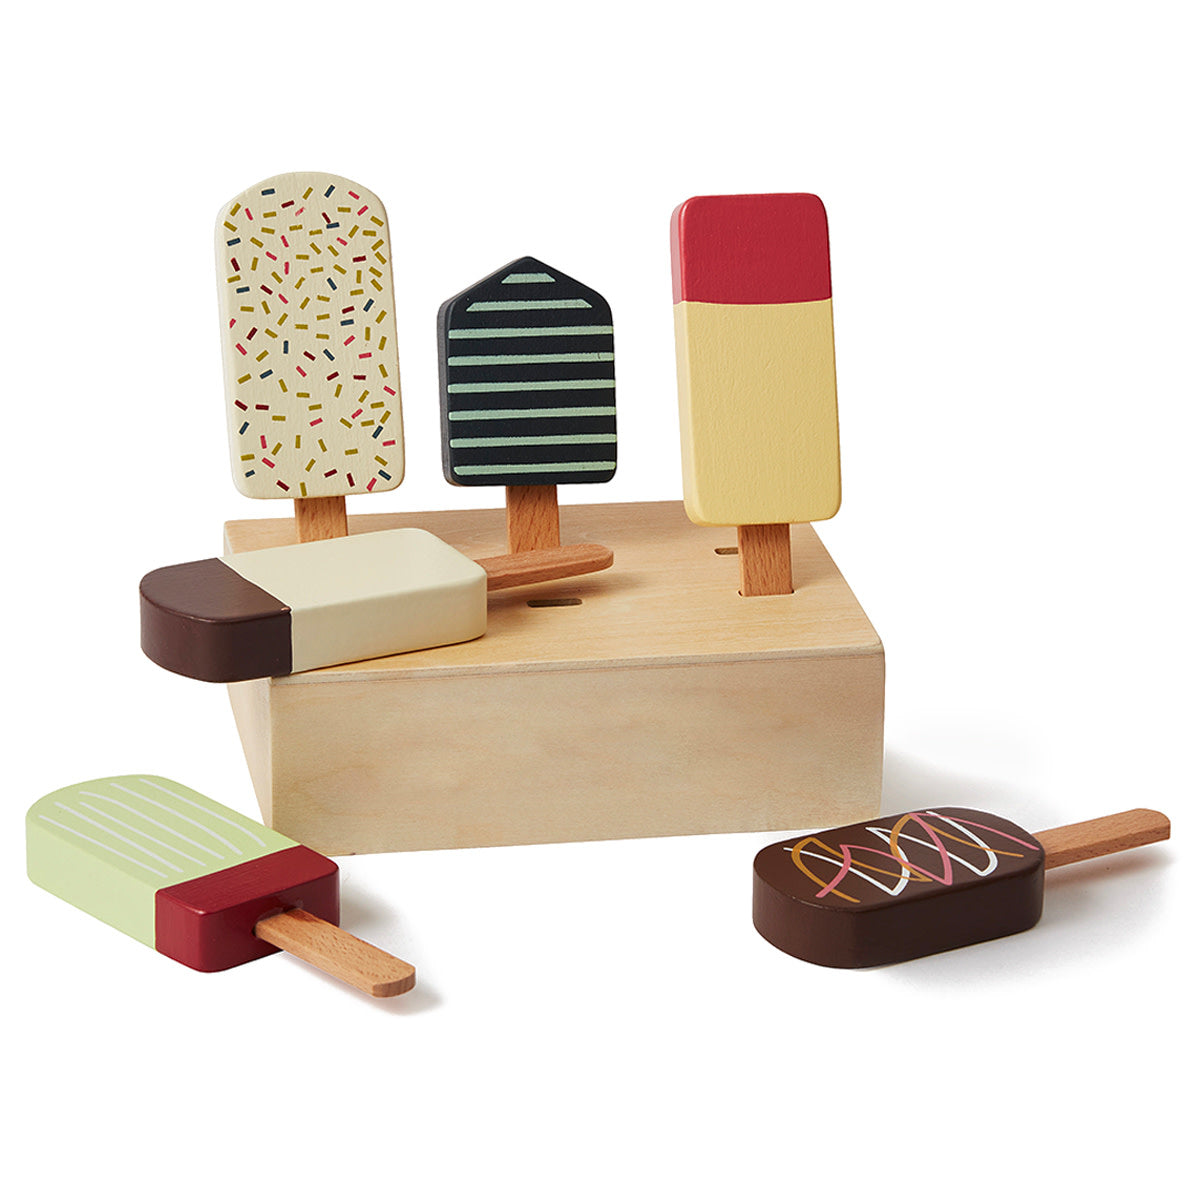 Wooden Ice Lolly Toys